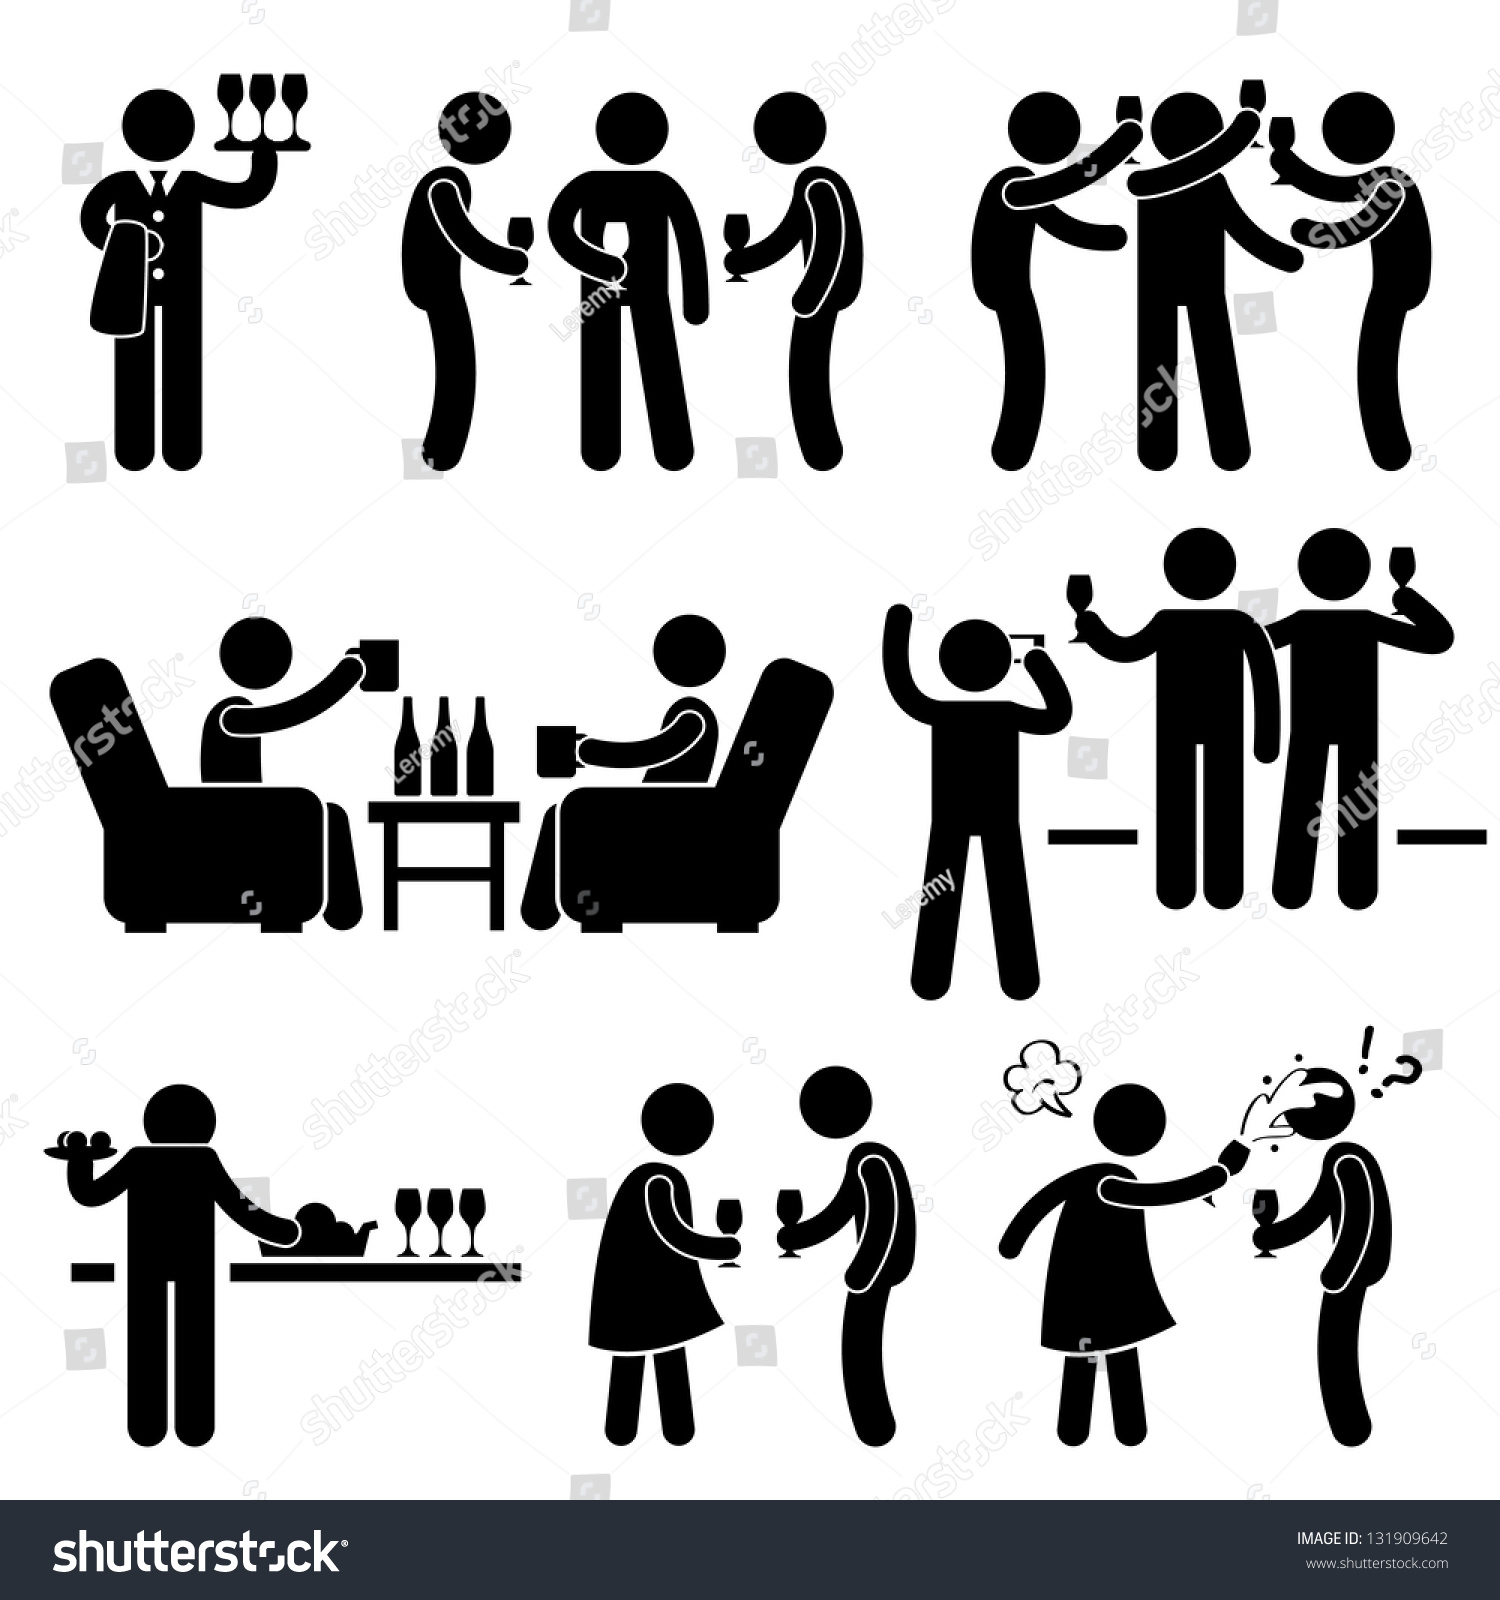 SVG of Cocktail Party People Man Friend Gathering Enjoying Wine Beer Stick Figure Pictogram Icon svg